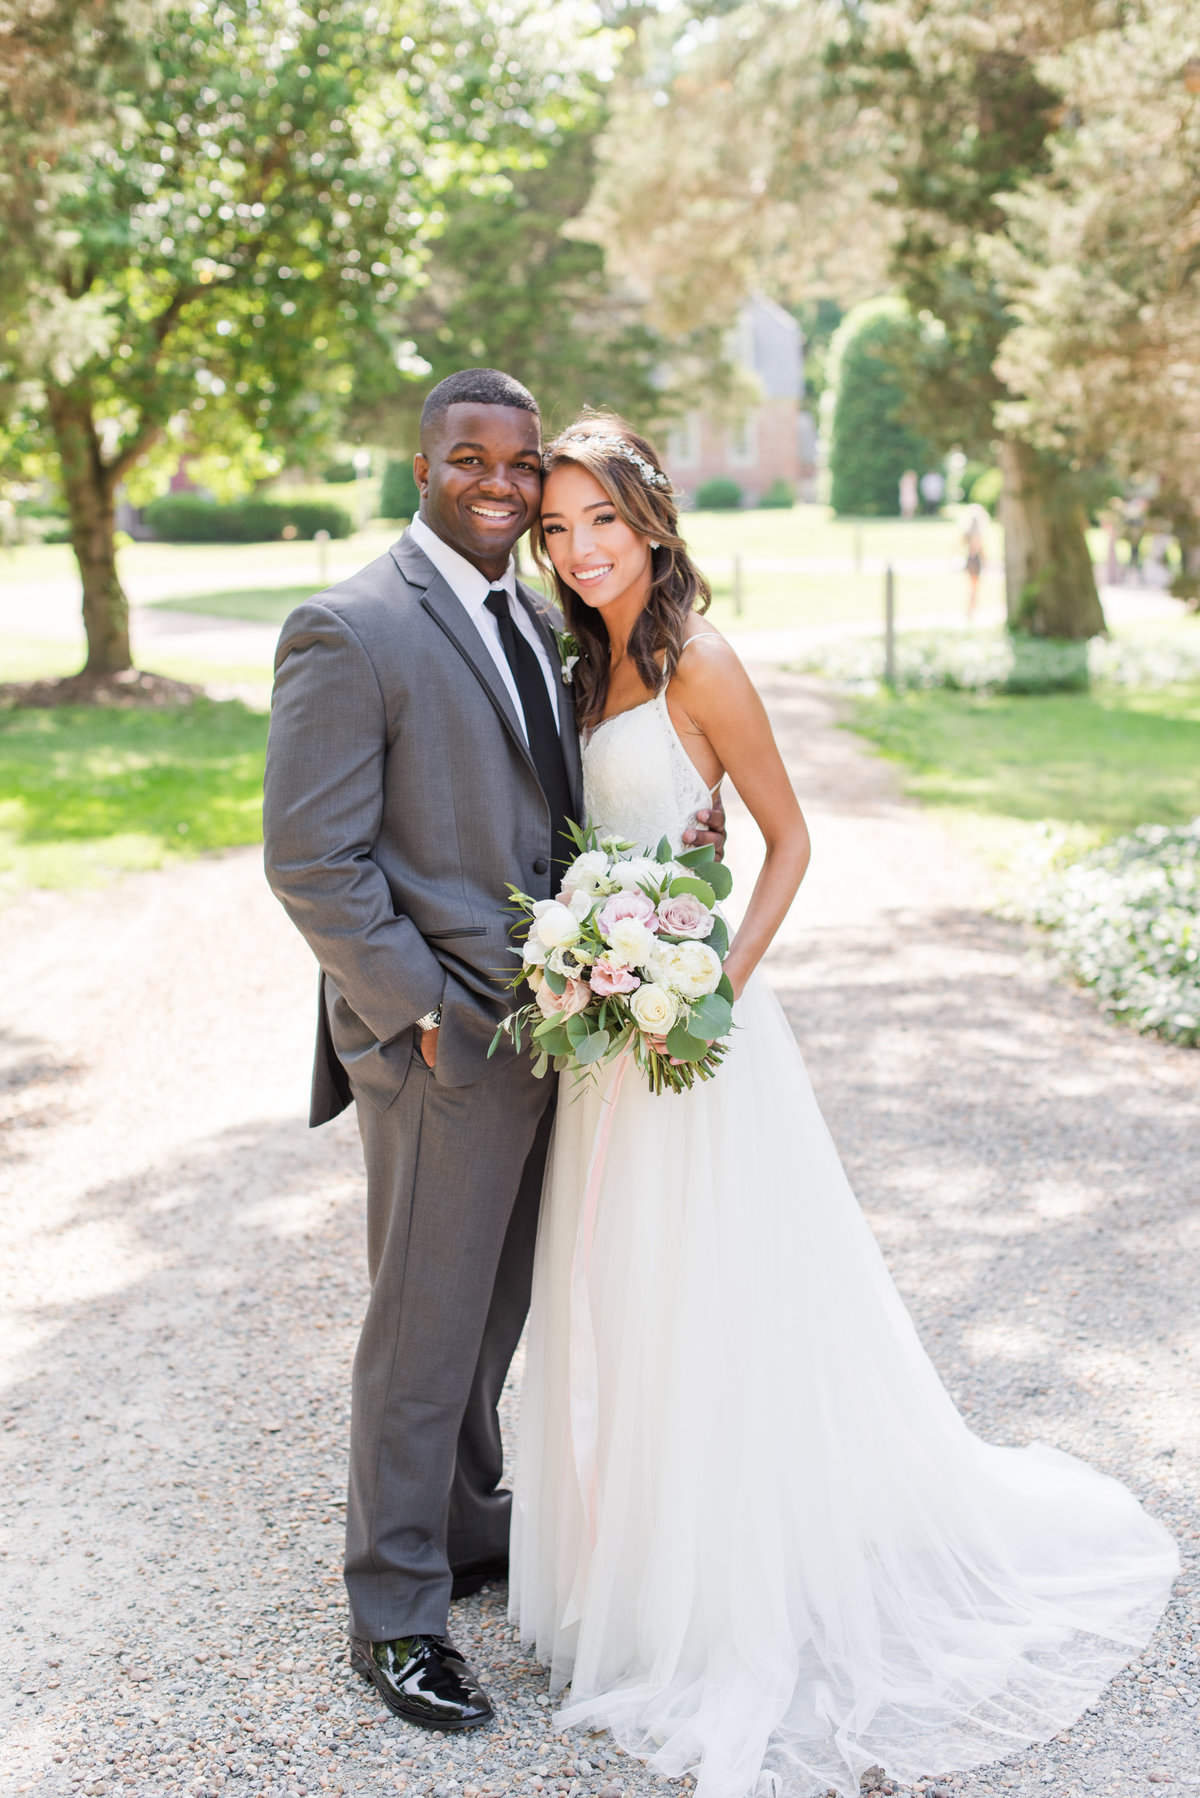 Virginia Bride and groom smiling during historic estate wedding in the spring